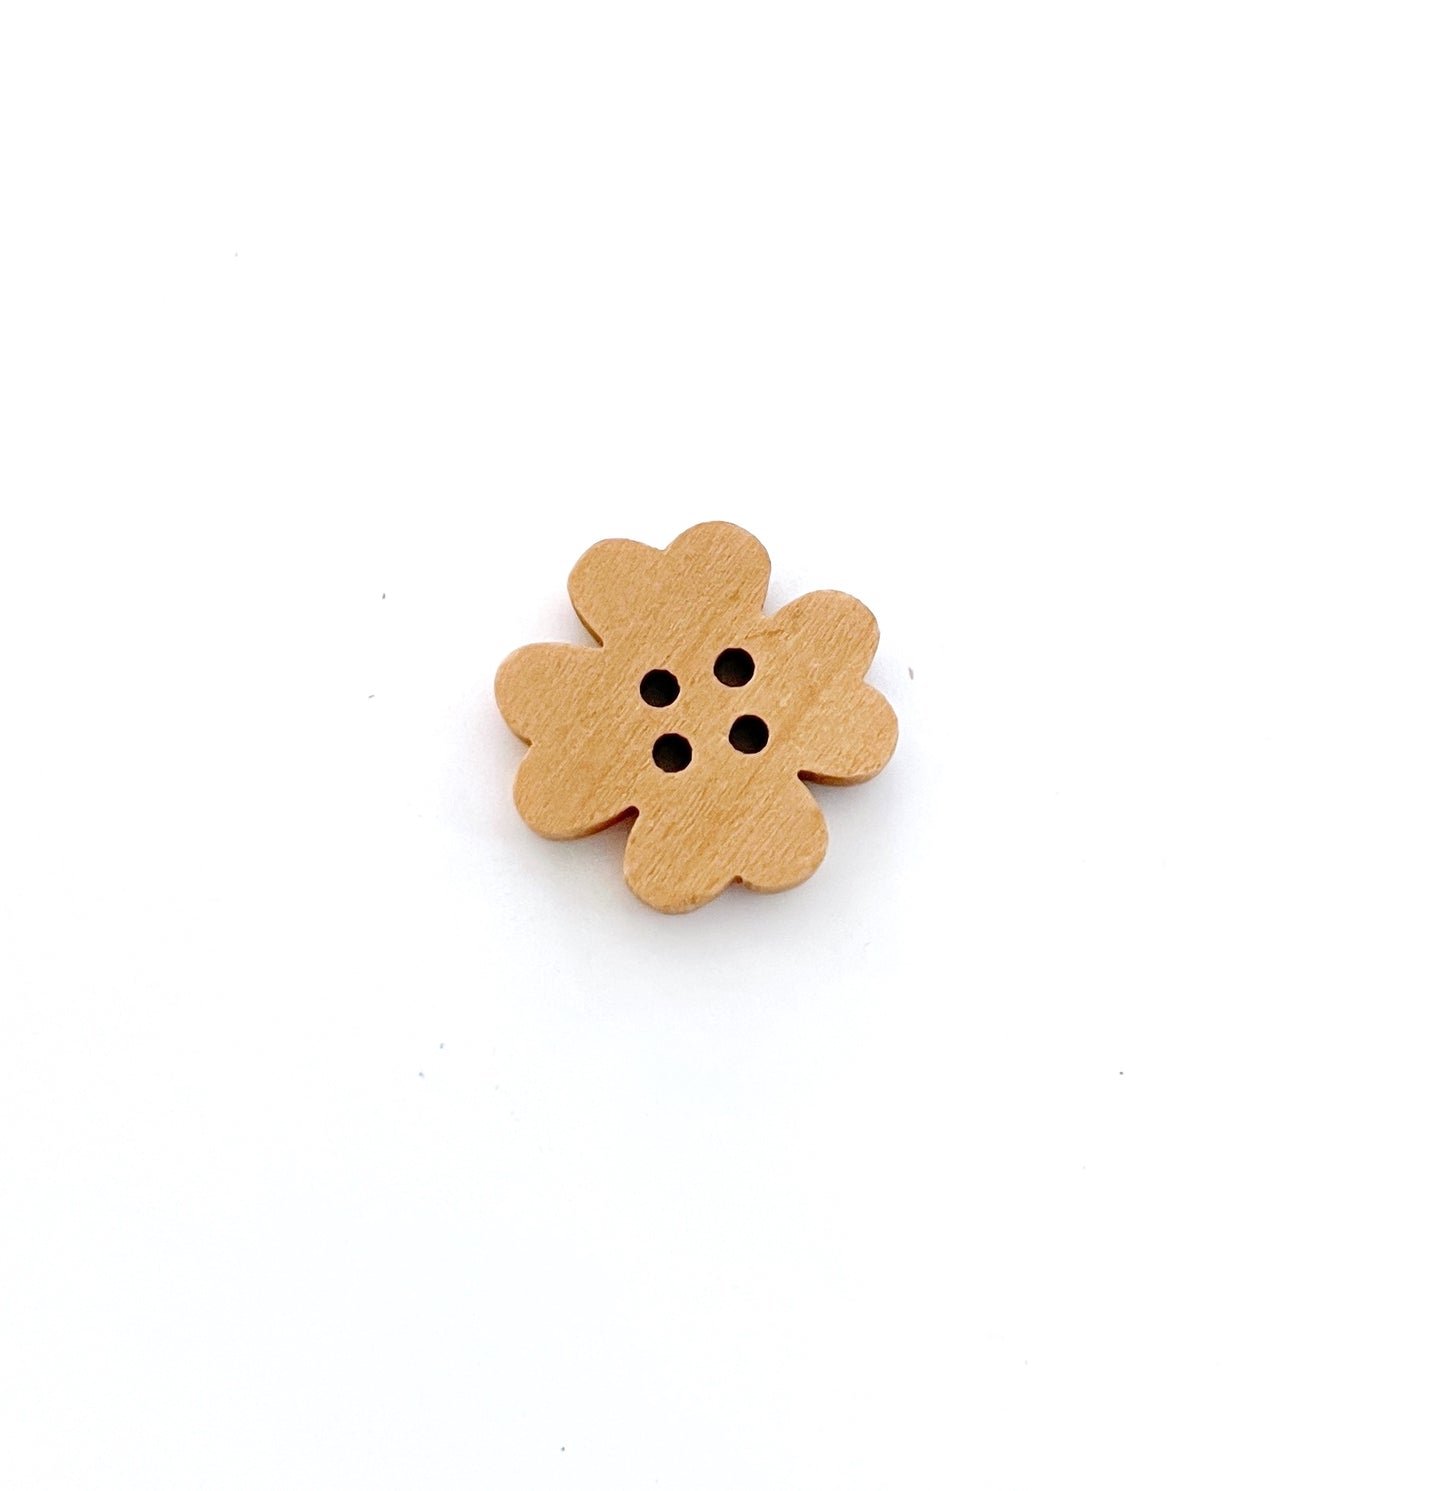 Fancy Wooden buttons - pack of 7 - DWB02